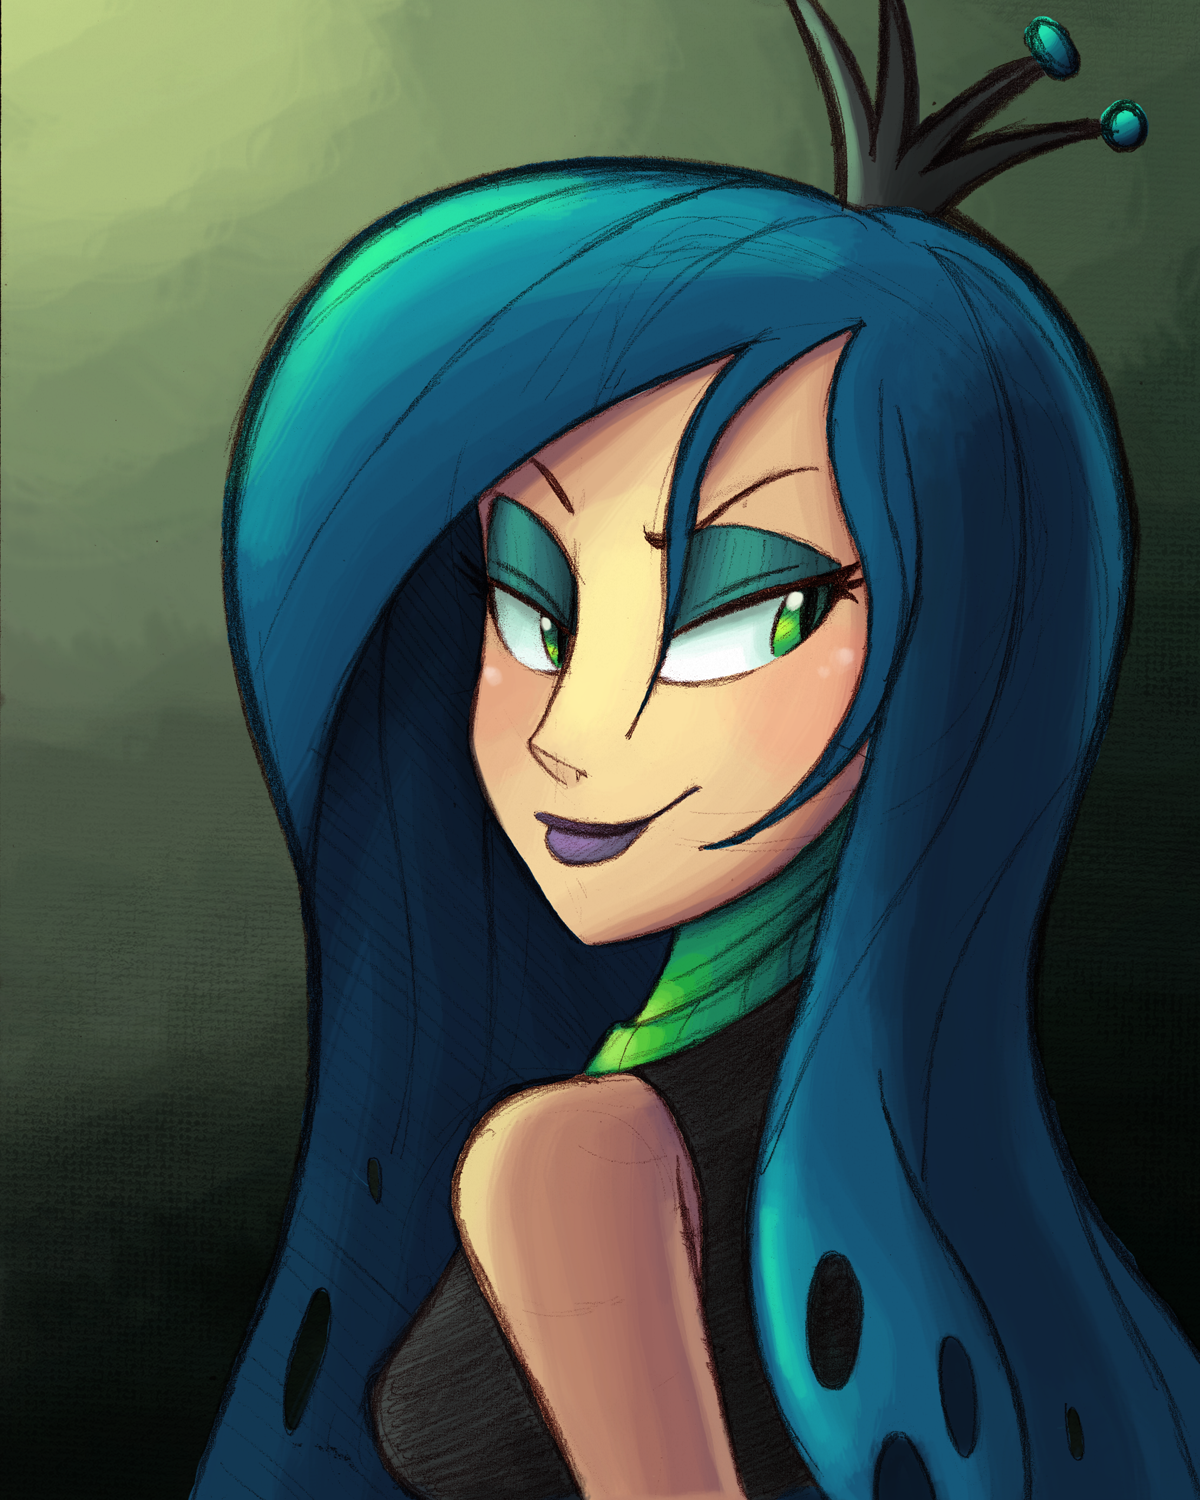 Queen Chrysalis 2 by Ric-M on DeviantArt